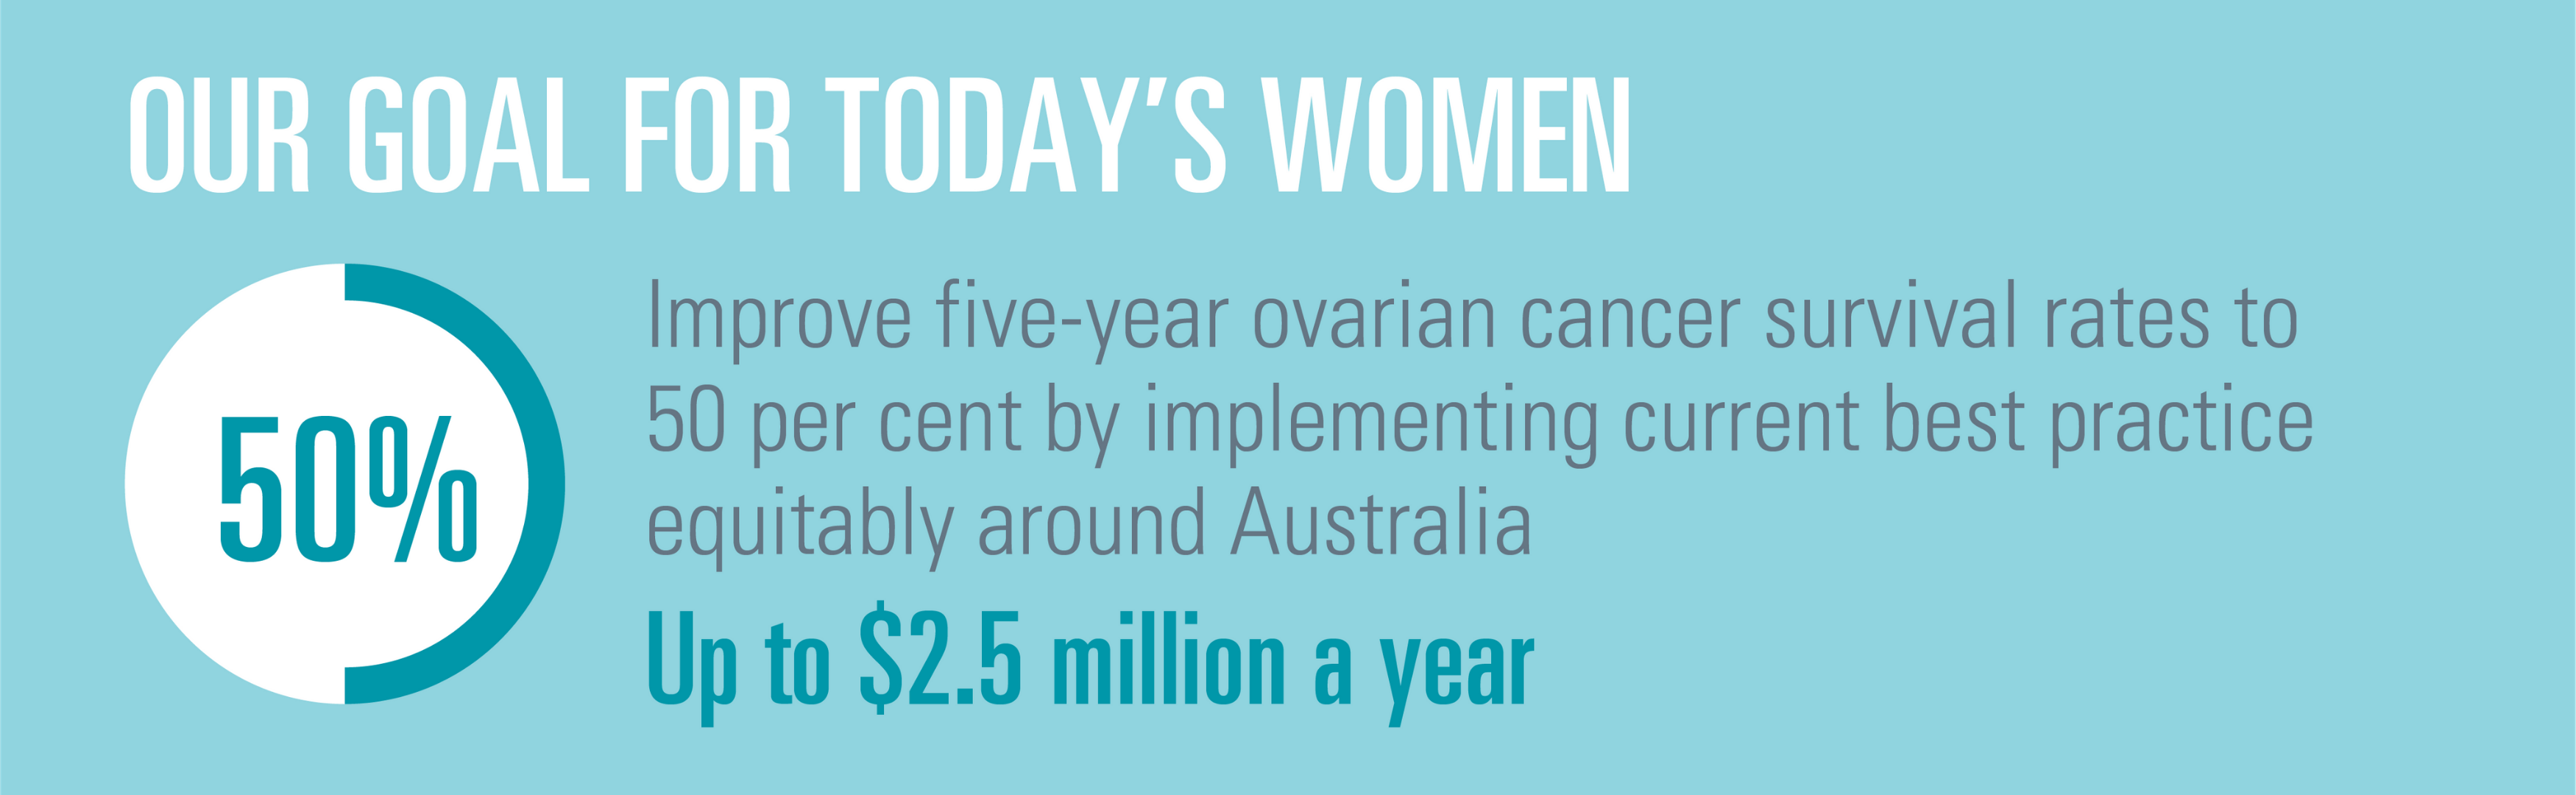 Image outlining goal 1: improve five-year ovarian cancer survival rates to 50 per cent by implementing current best practice equitably around Australia. Up to $2.5 million a year.